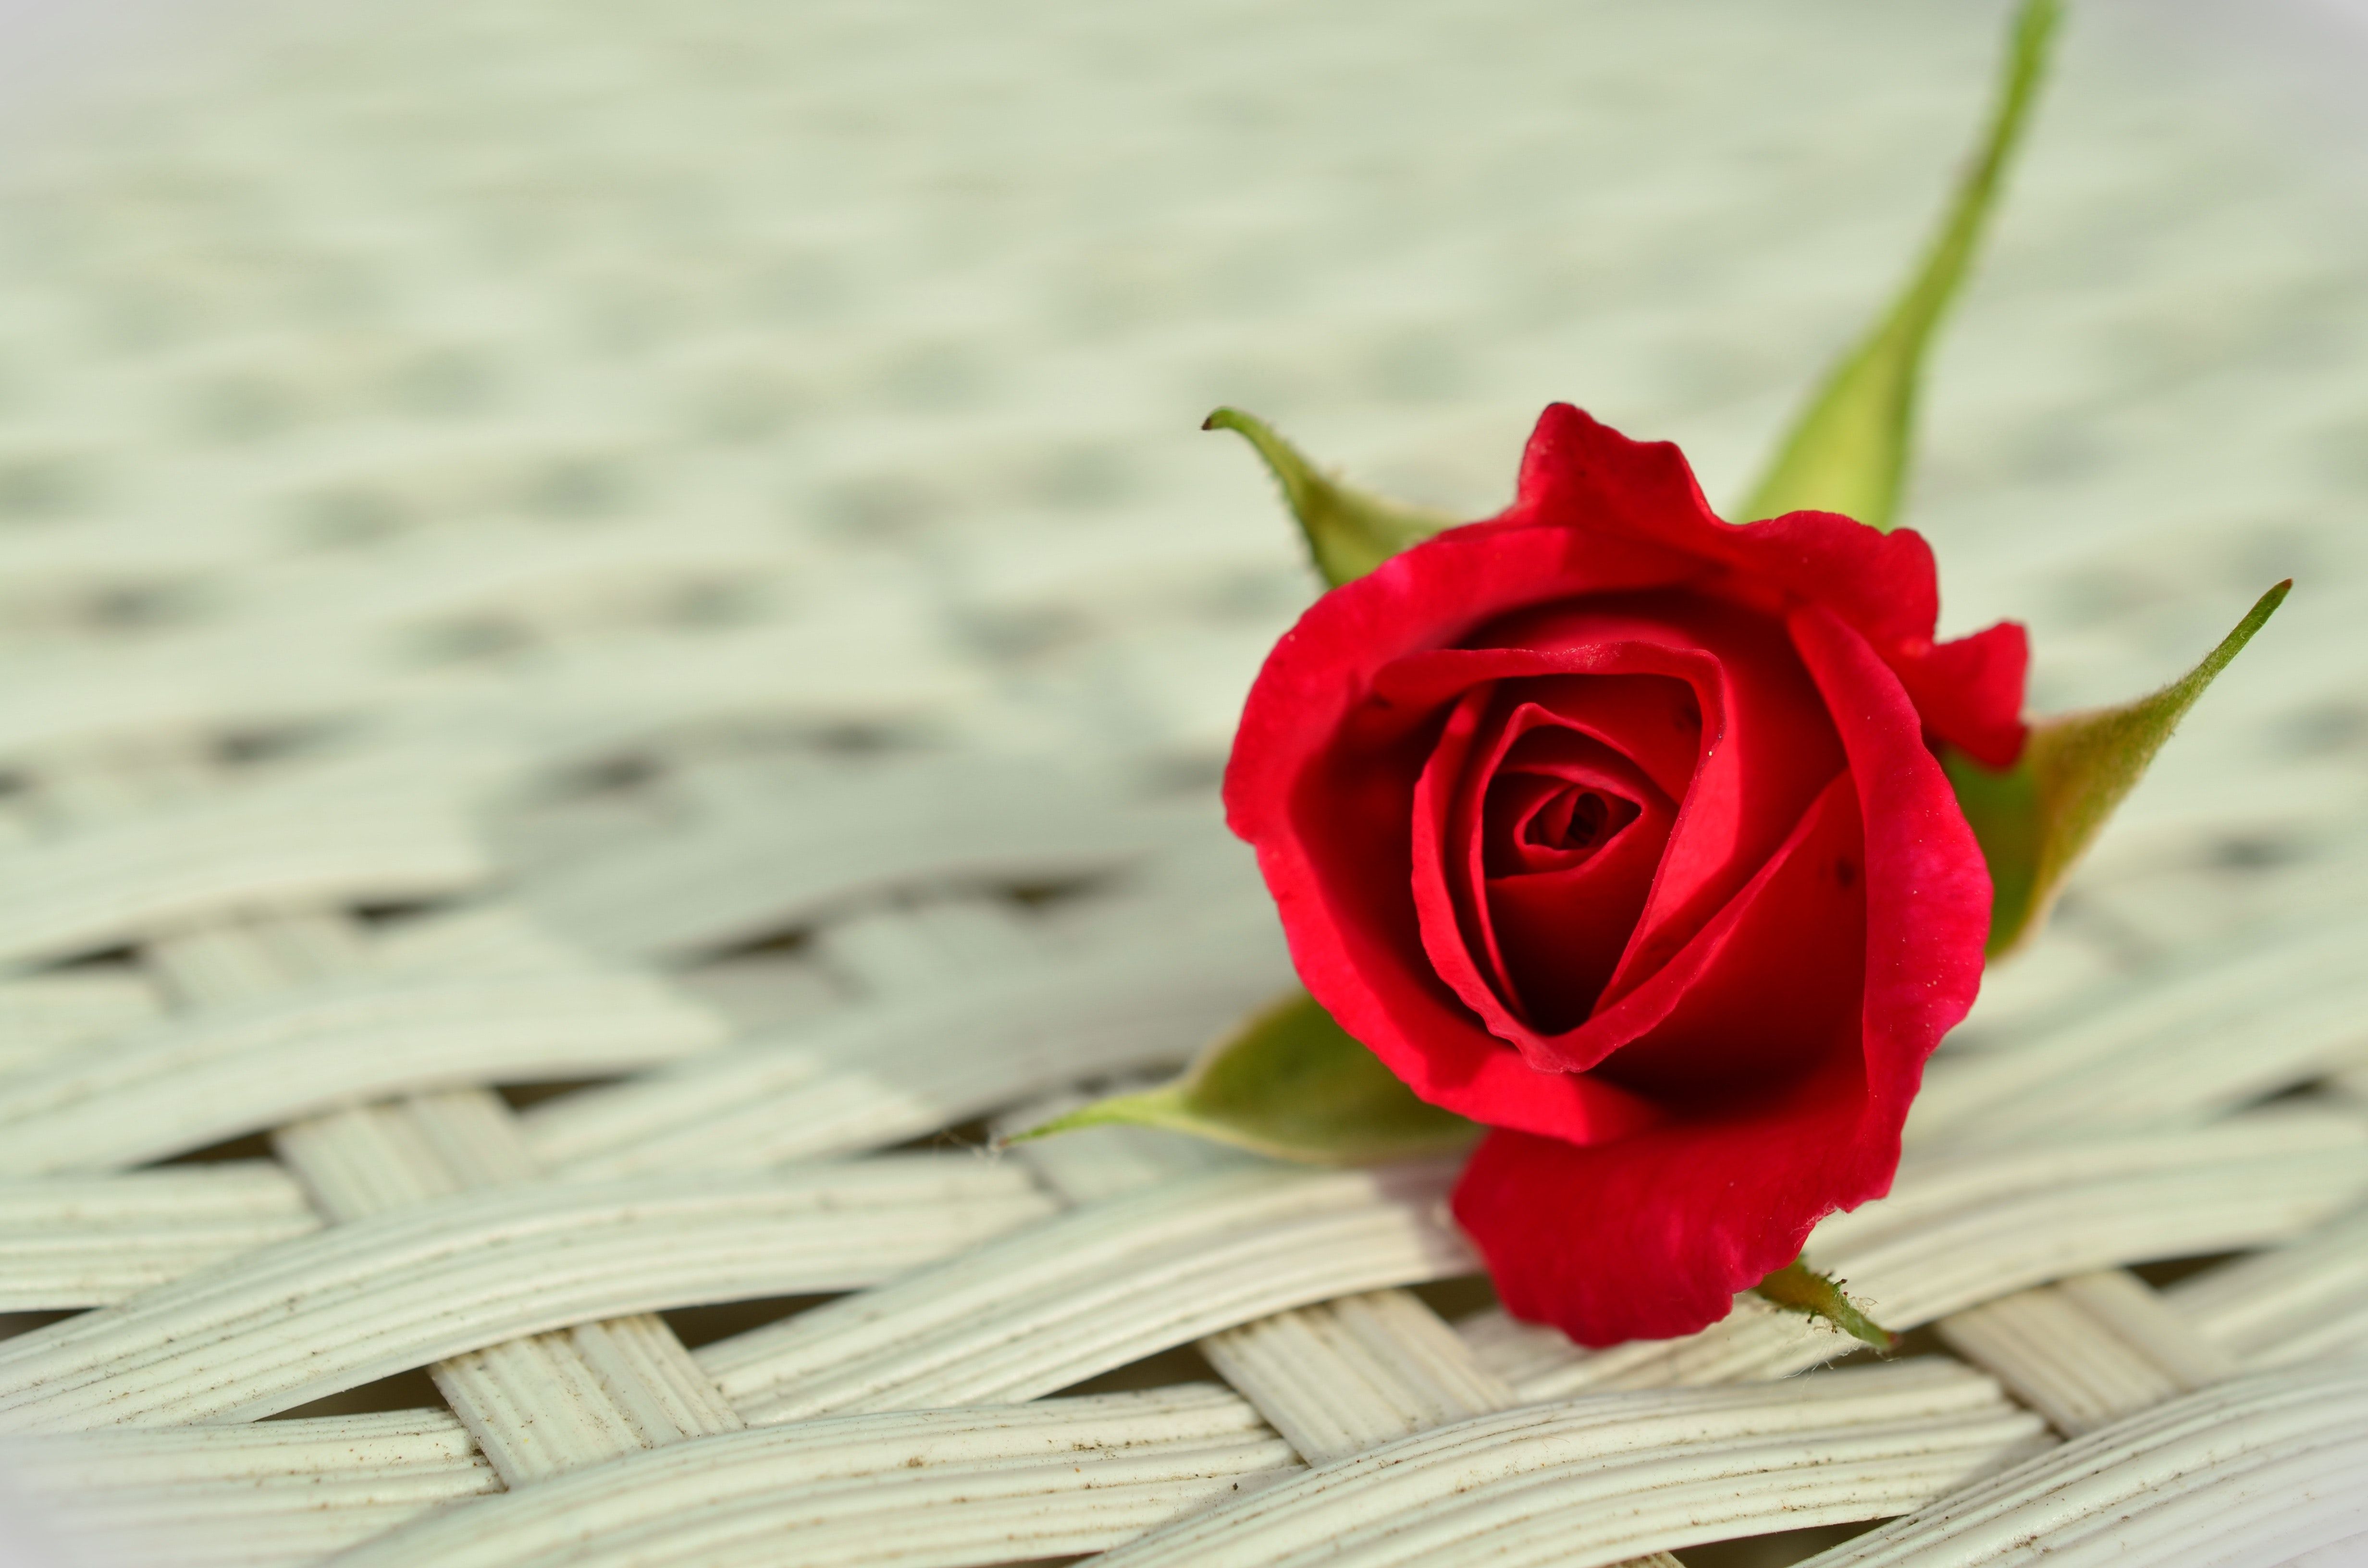 Free photo: Red Rose on White Weaved Surface, Blossom